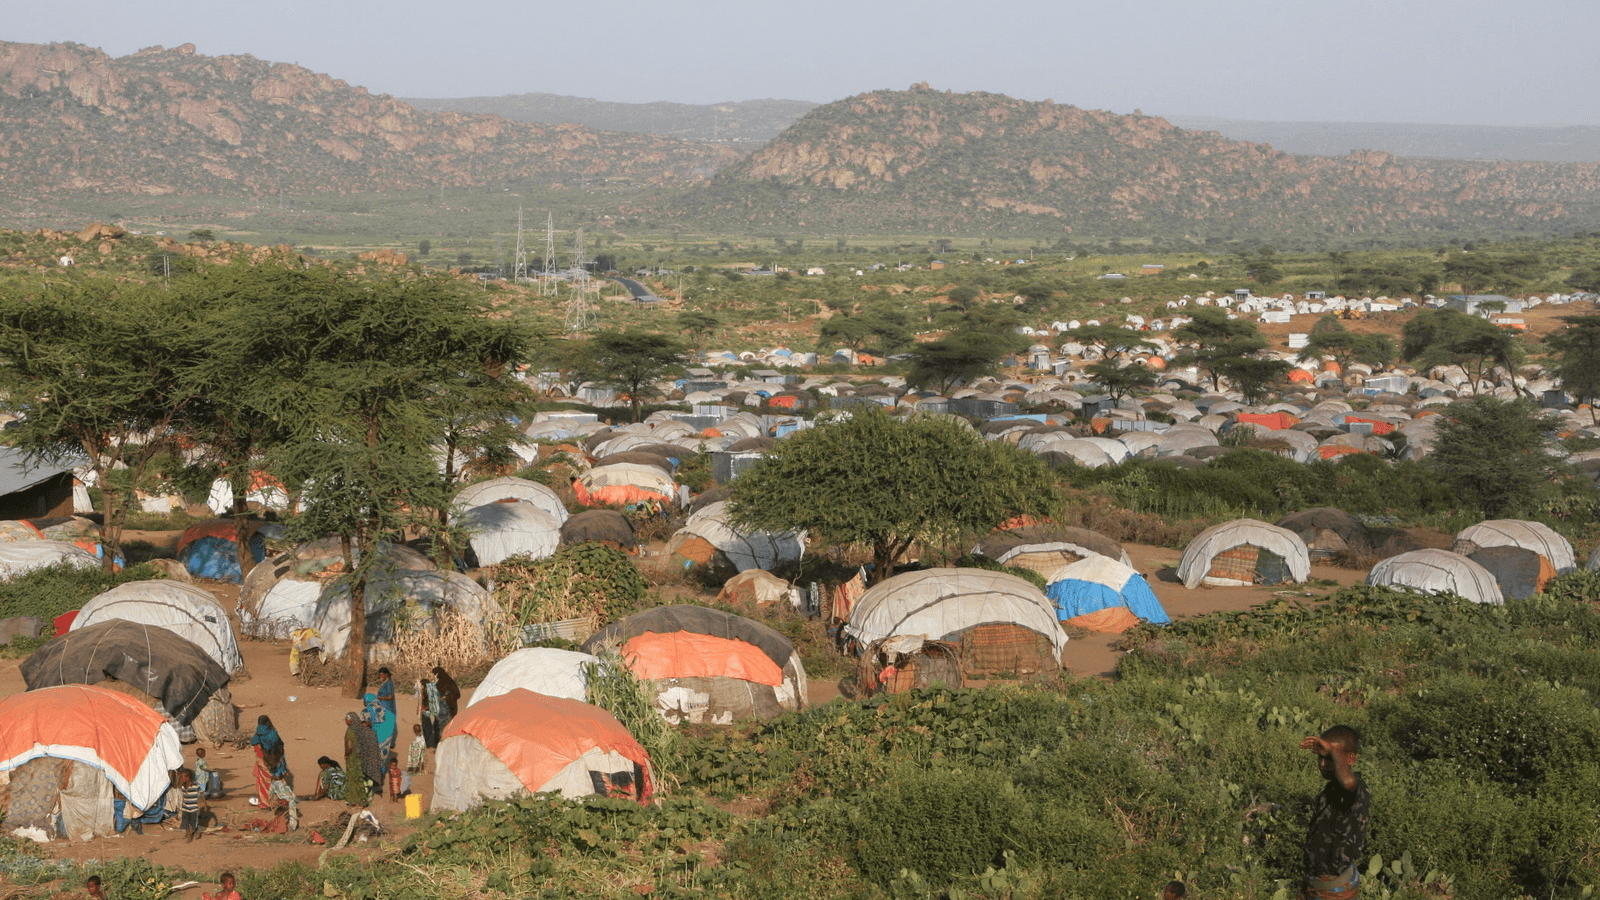 Overlooking the camps for Somalis displaced by ethnic violence in the lee of the Kolenchi hills in the Somali region.